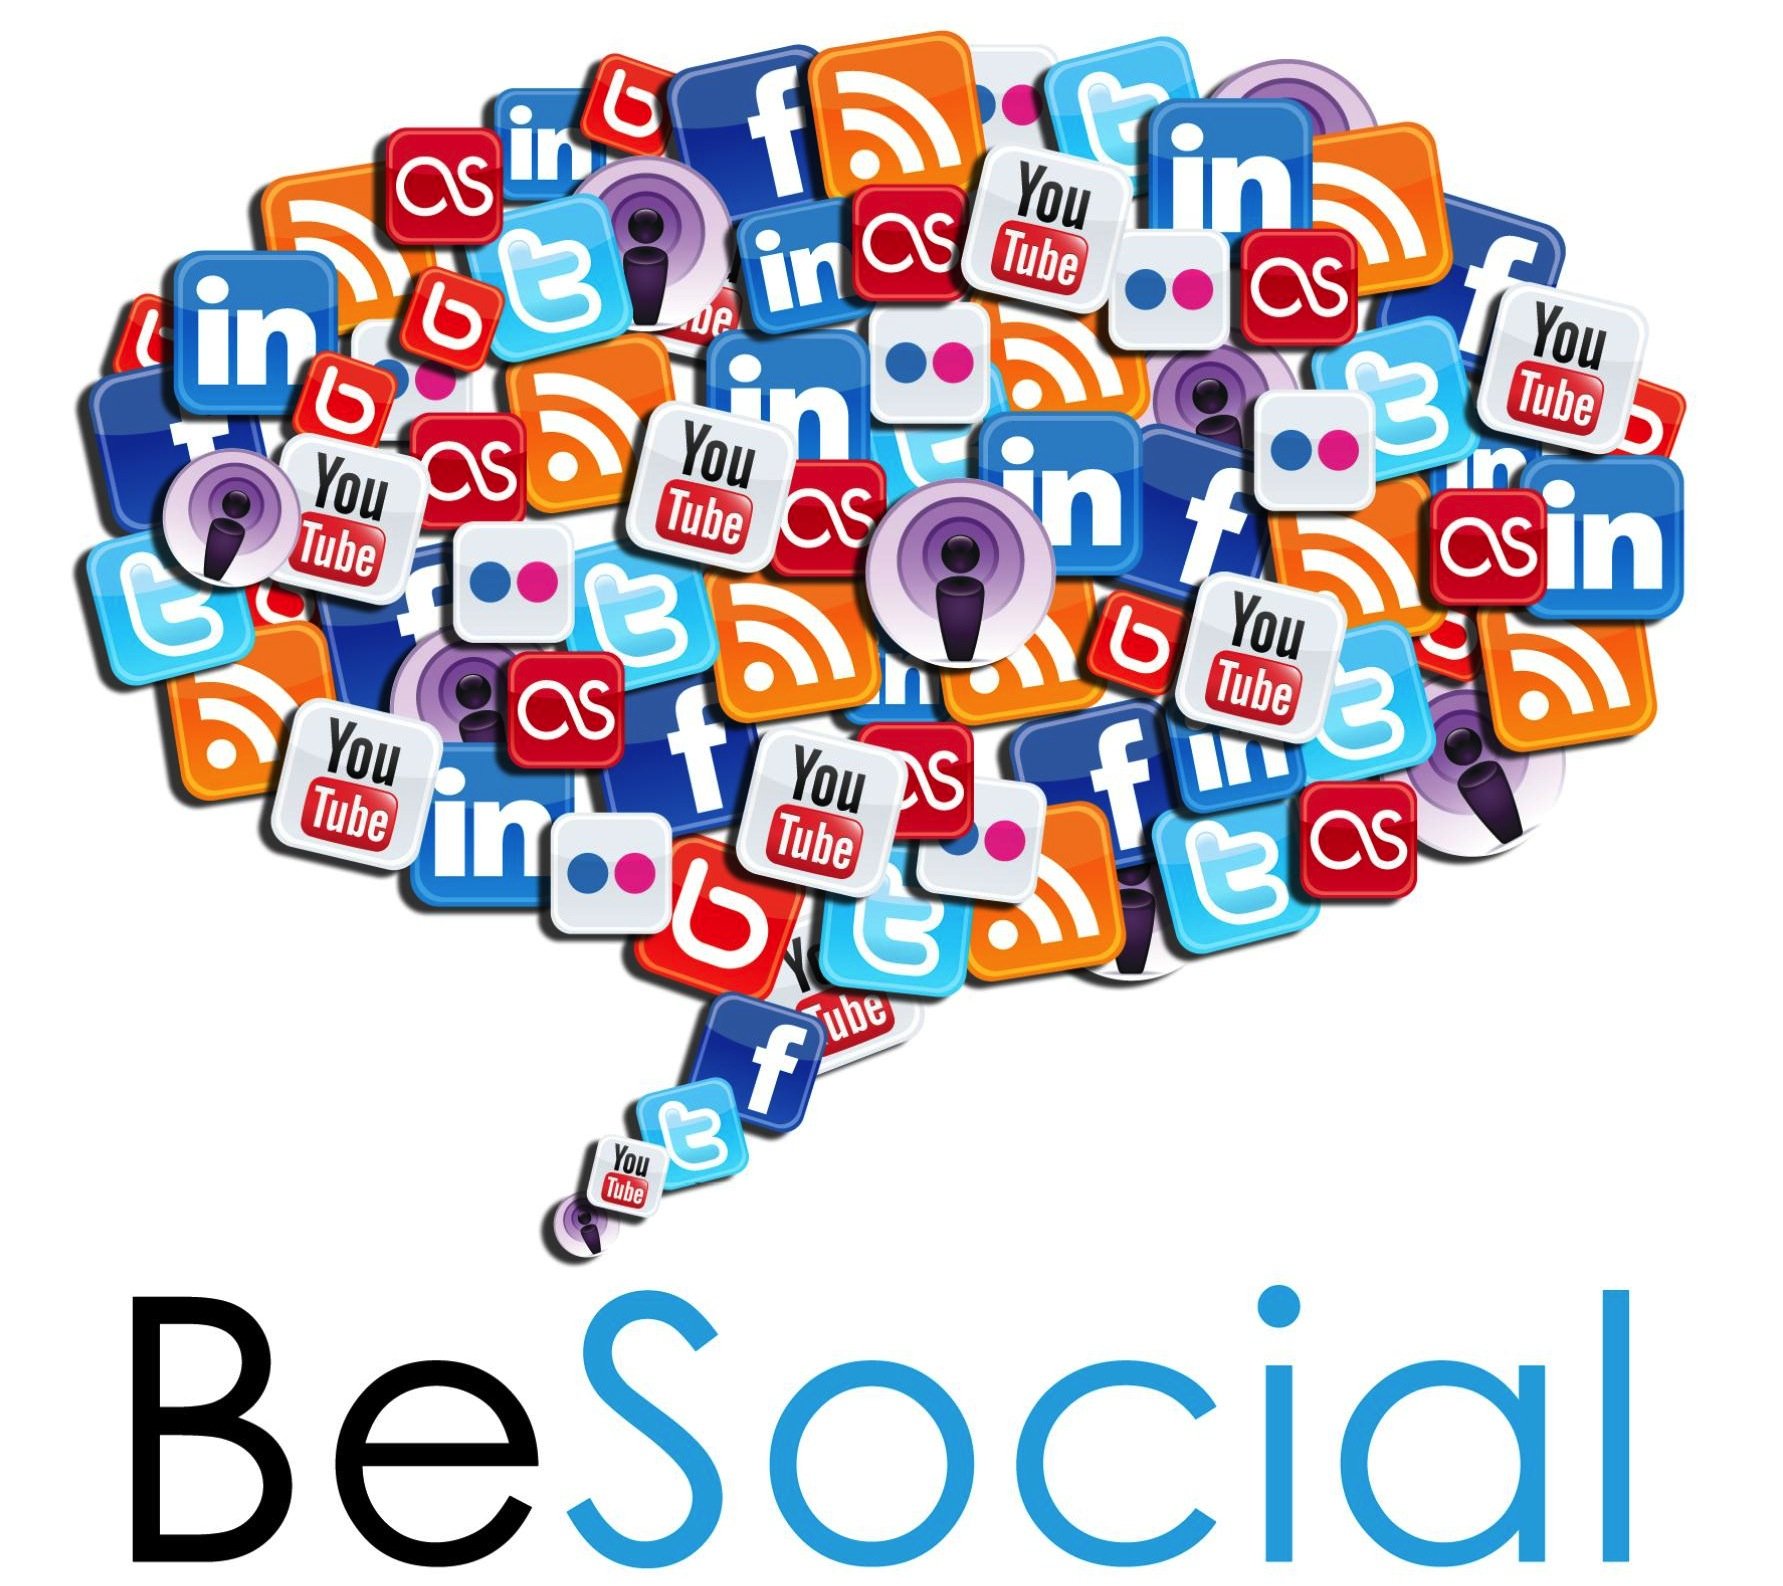 UPDATED: ‘Be Social’ – A Social Media Handbook for Churches [FREE DOWNLOAD]